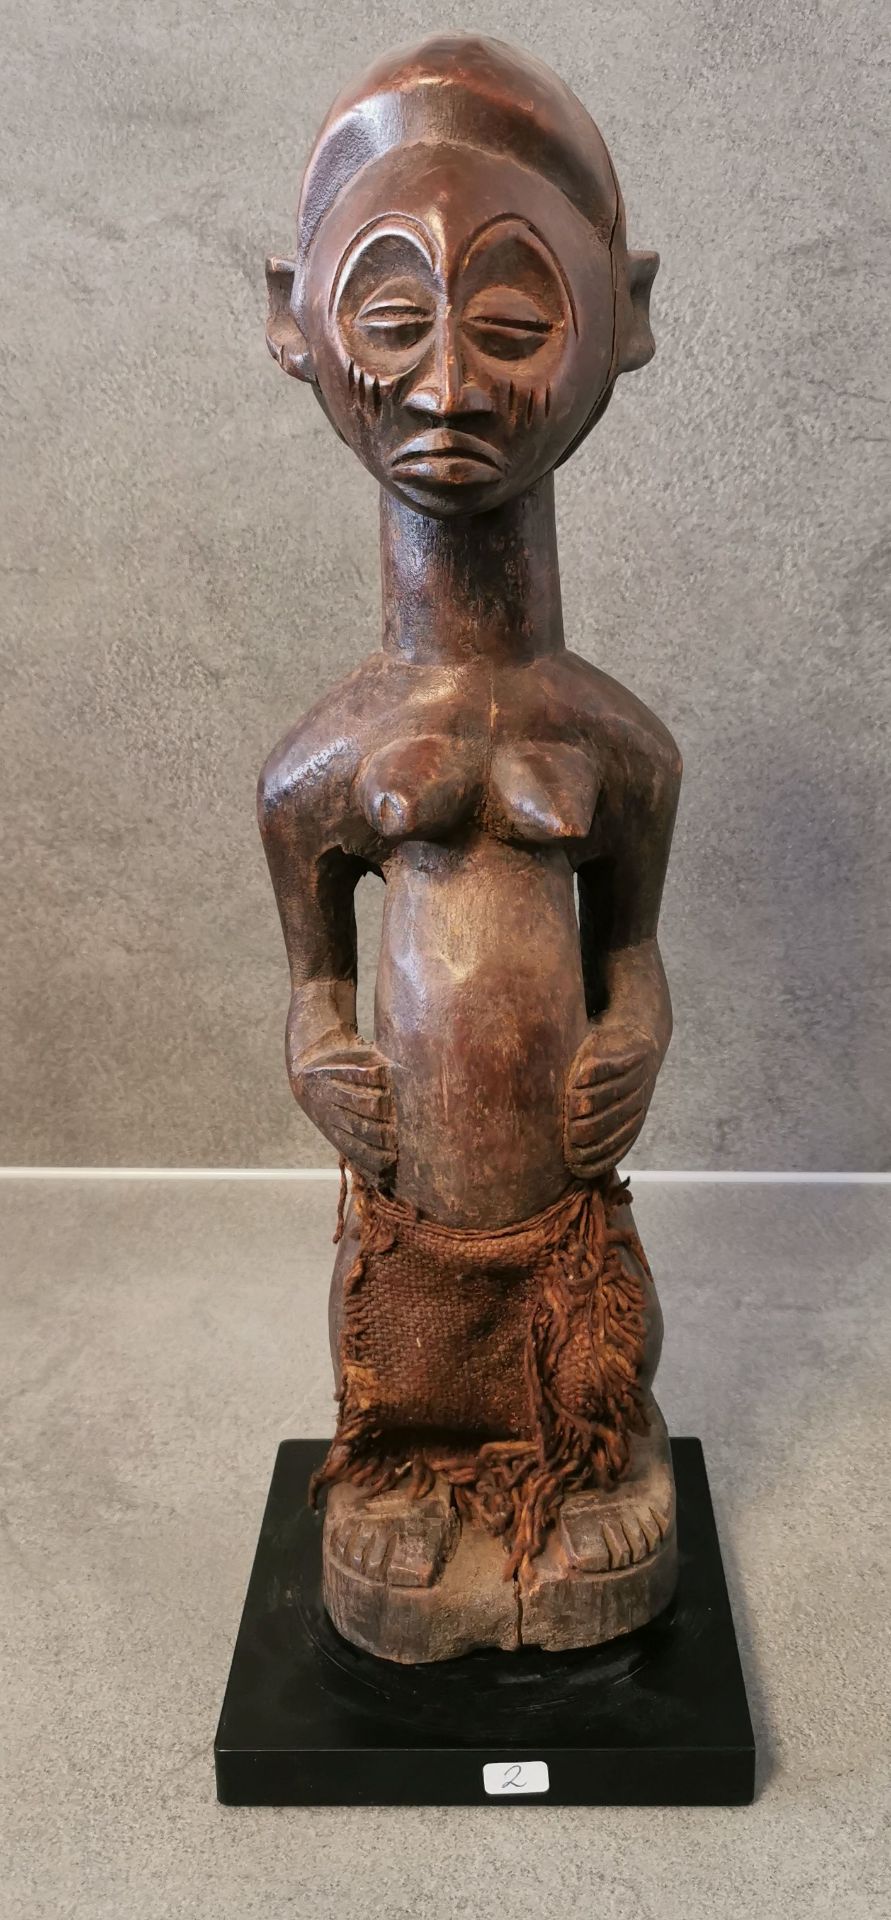 AFRICAN SCULPTURE: "Standing female nude with loincloths / ancestor figure", wood, carved and